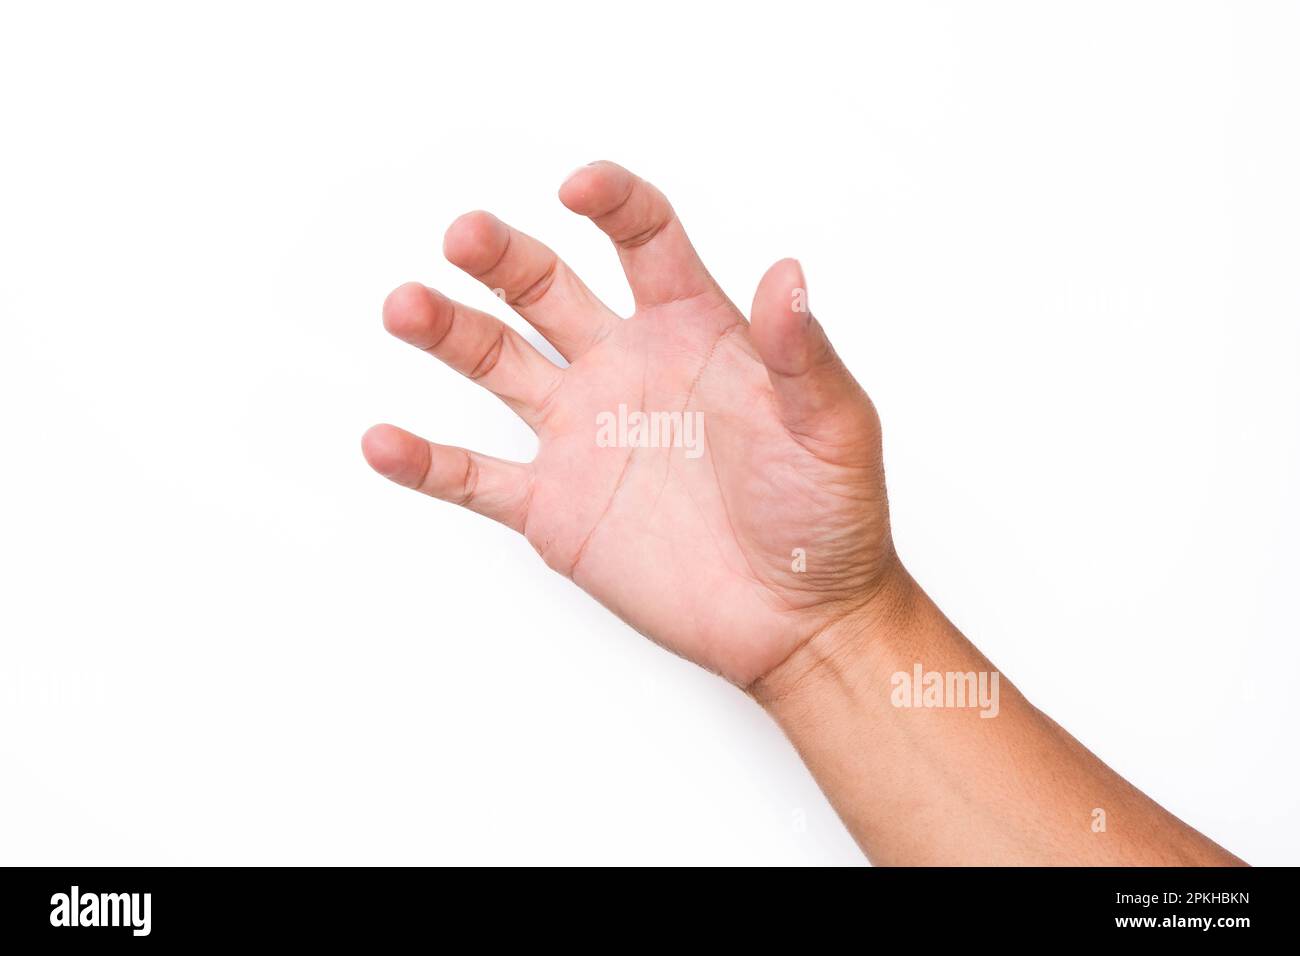 Close up of male hand reaching out ready to help or receive isolated on pink background. Helping hand outstretched for salvation. Stock Photo